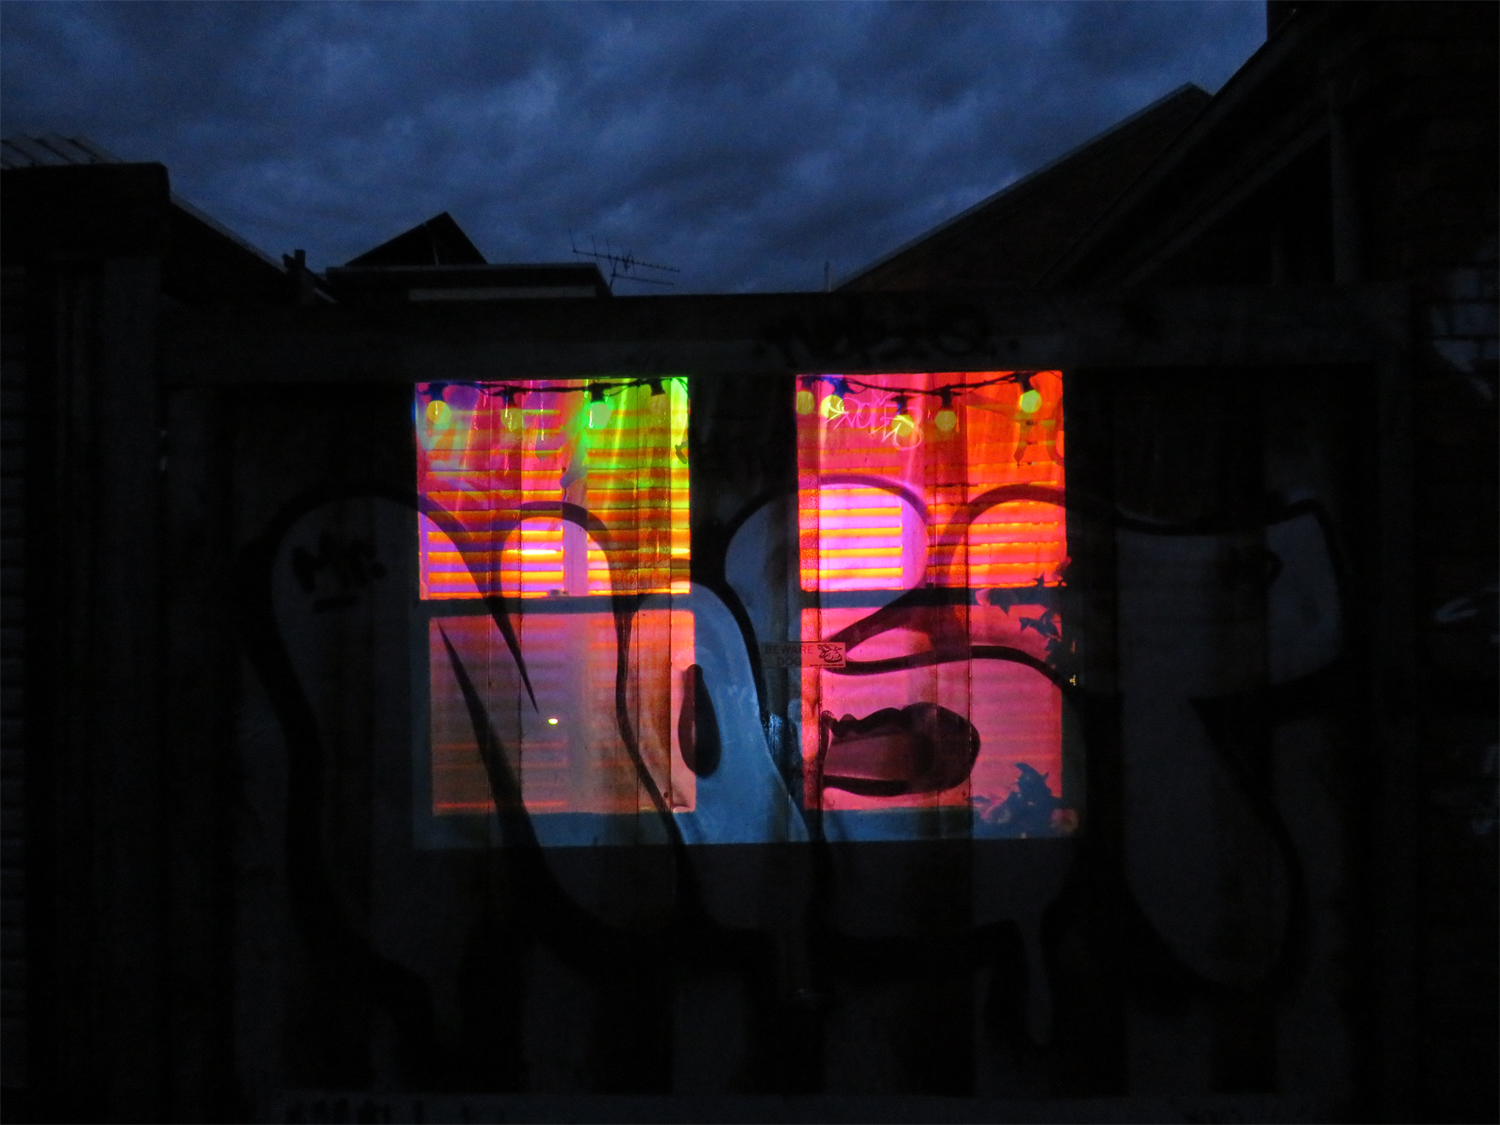 Colourful Window Projected onto Wall with Graffiti at Dusk